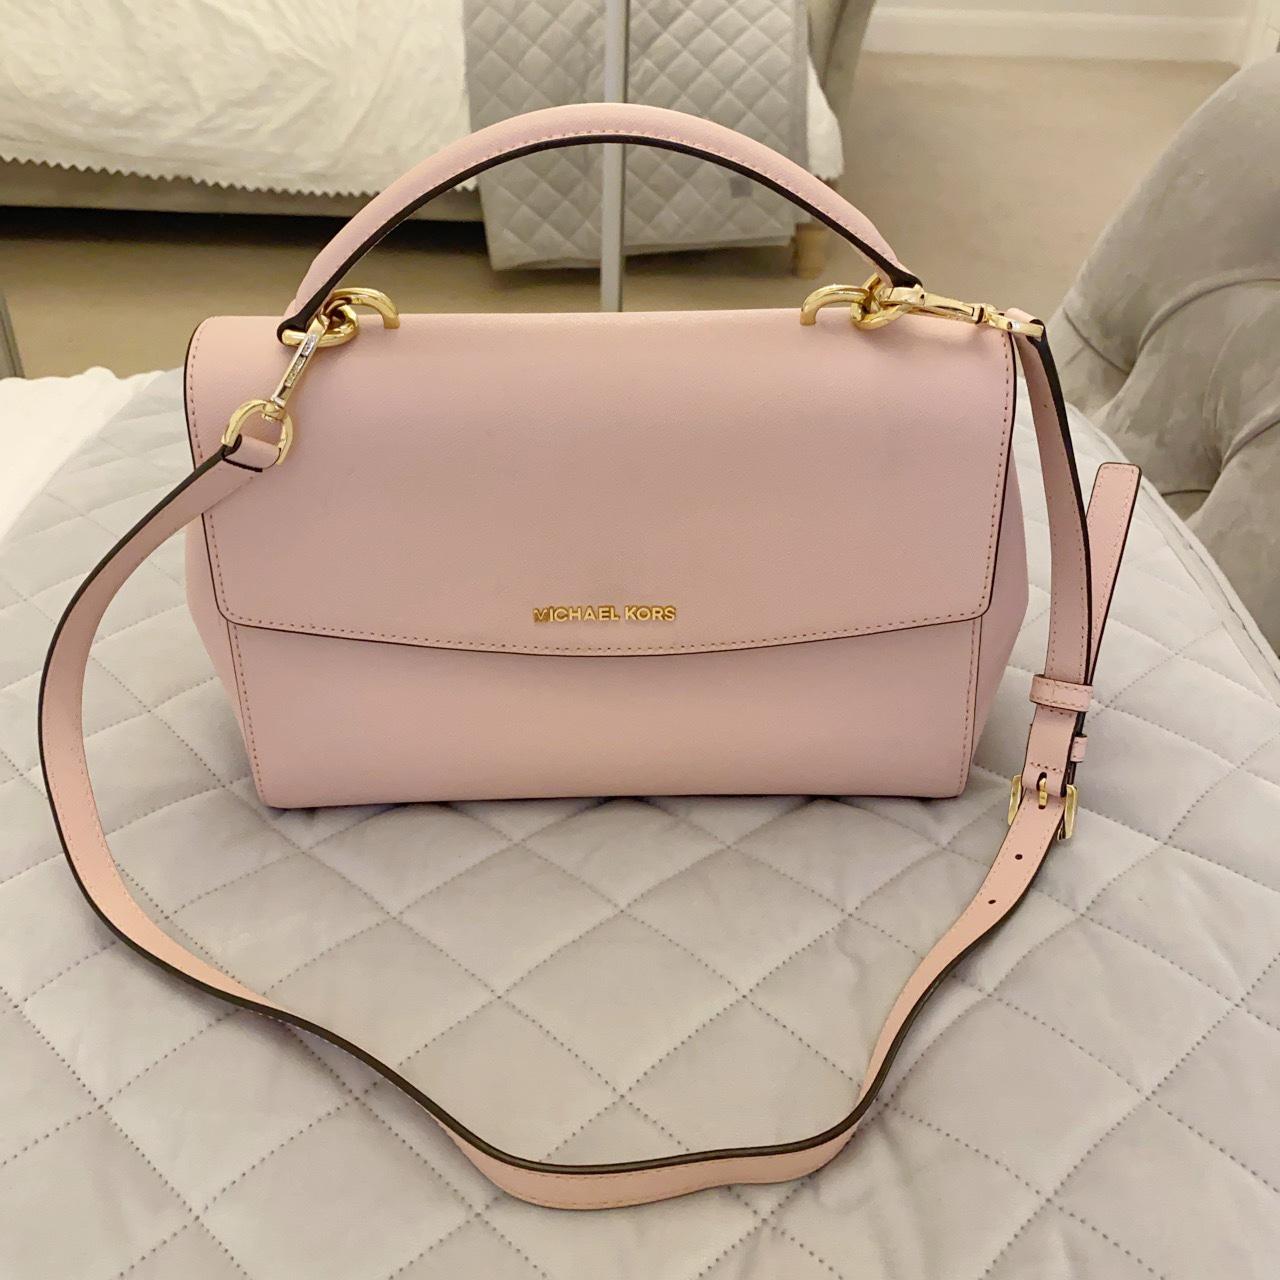 Ava leather crossbody bag Michael Kors Pink in Leather - 20460738